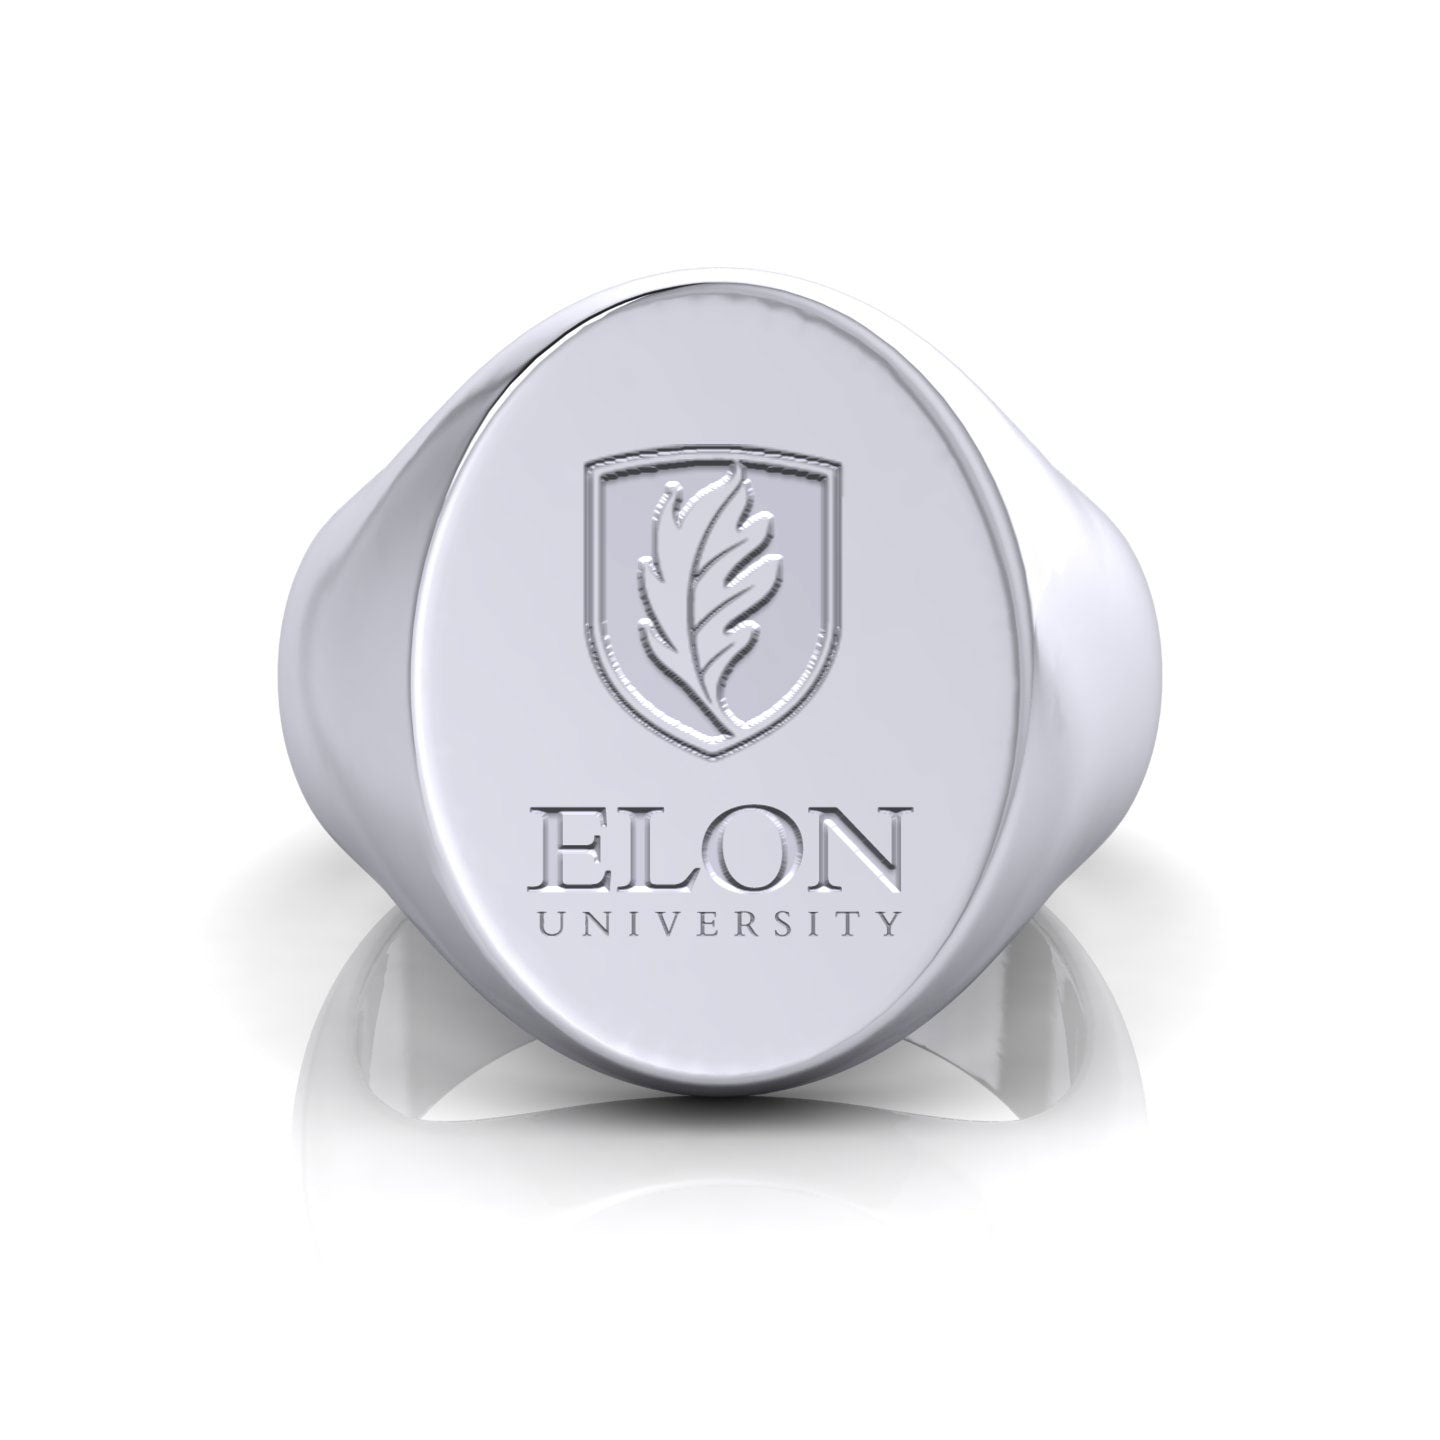 A close-up of the front view of an Elon University Meta Class Ring made of sterling silver. The ring class features the Elon University logo in a raised, polished finish.